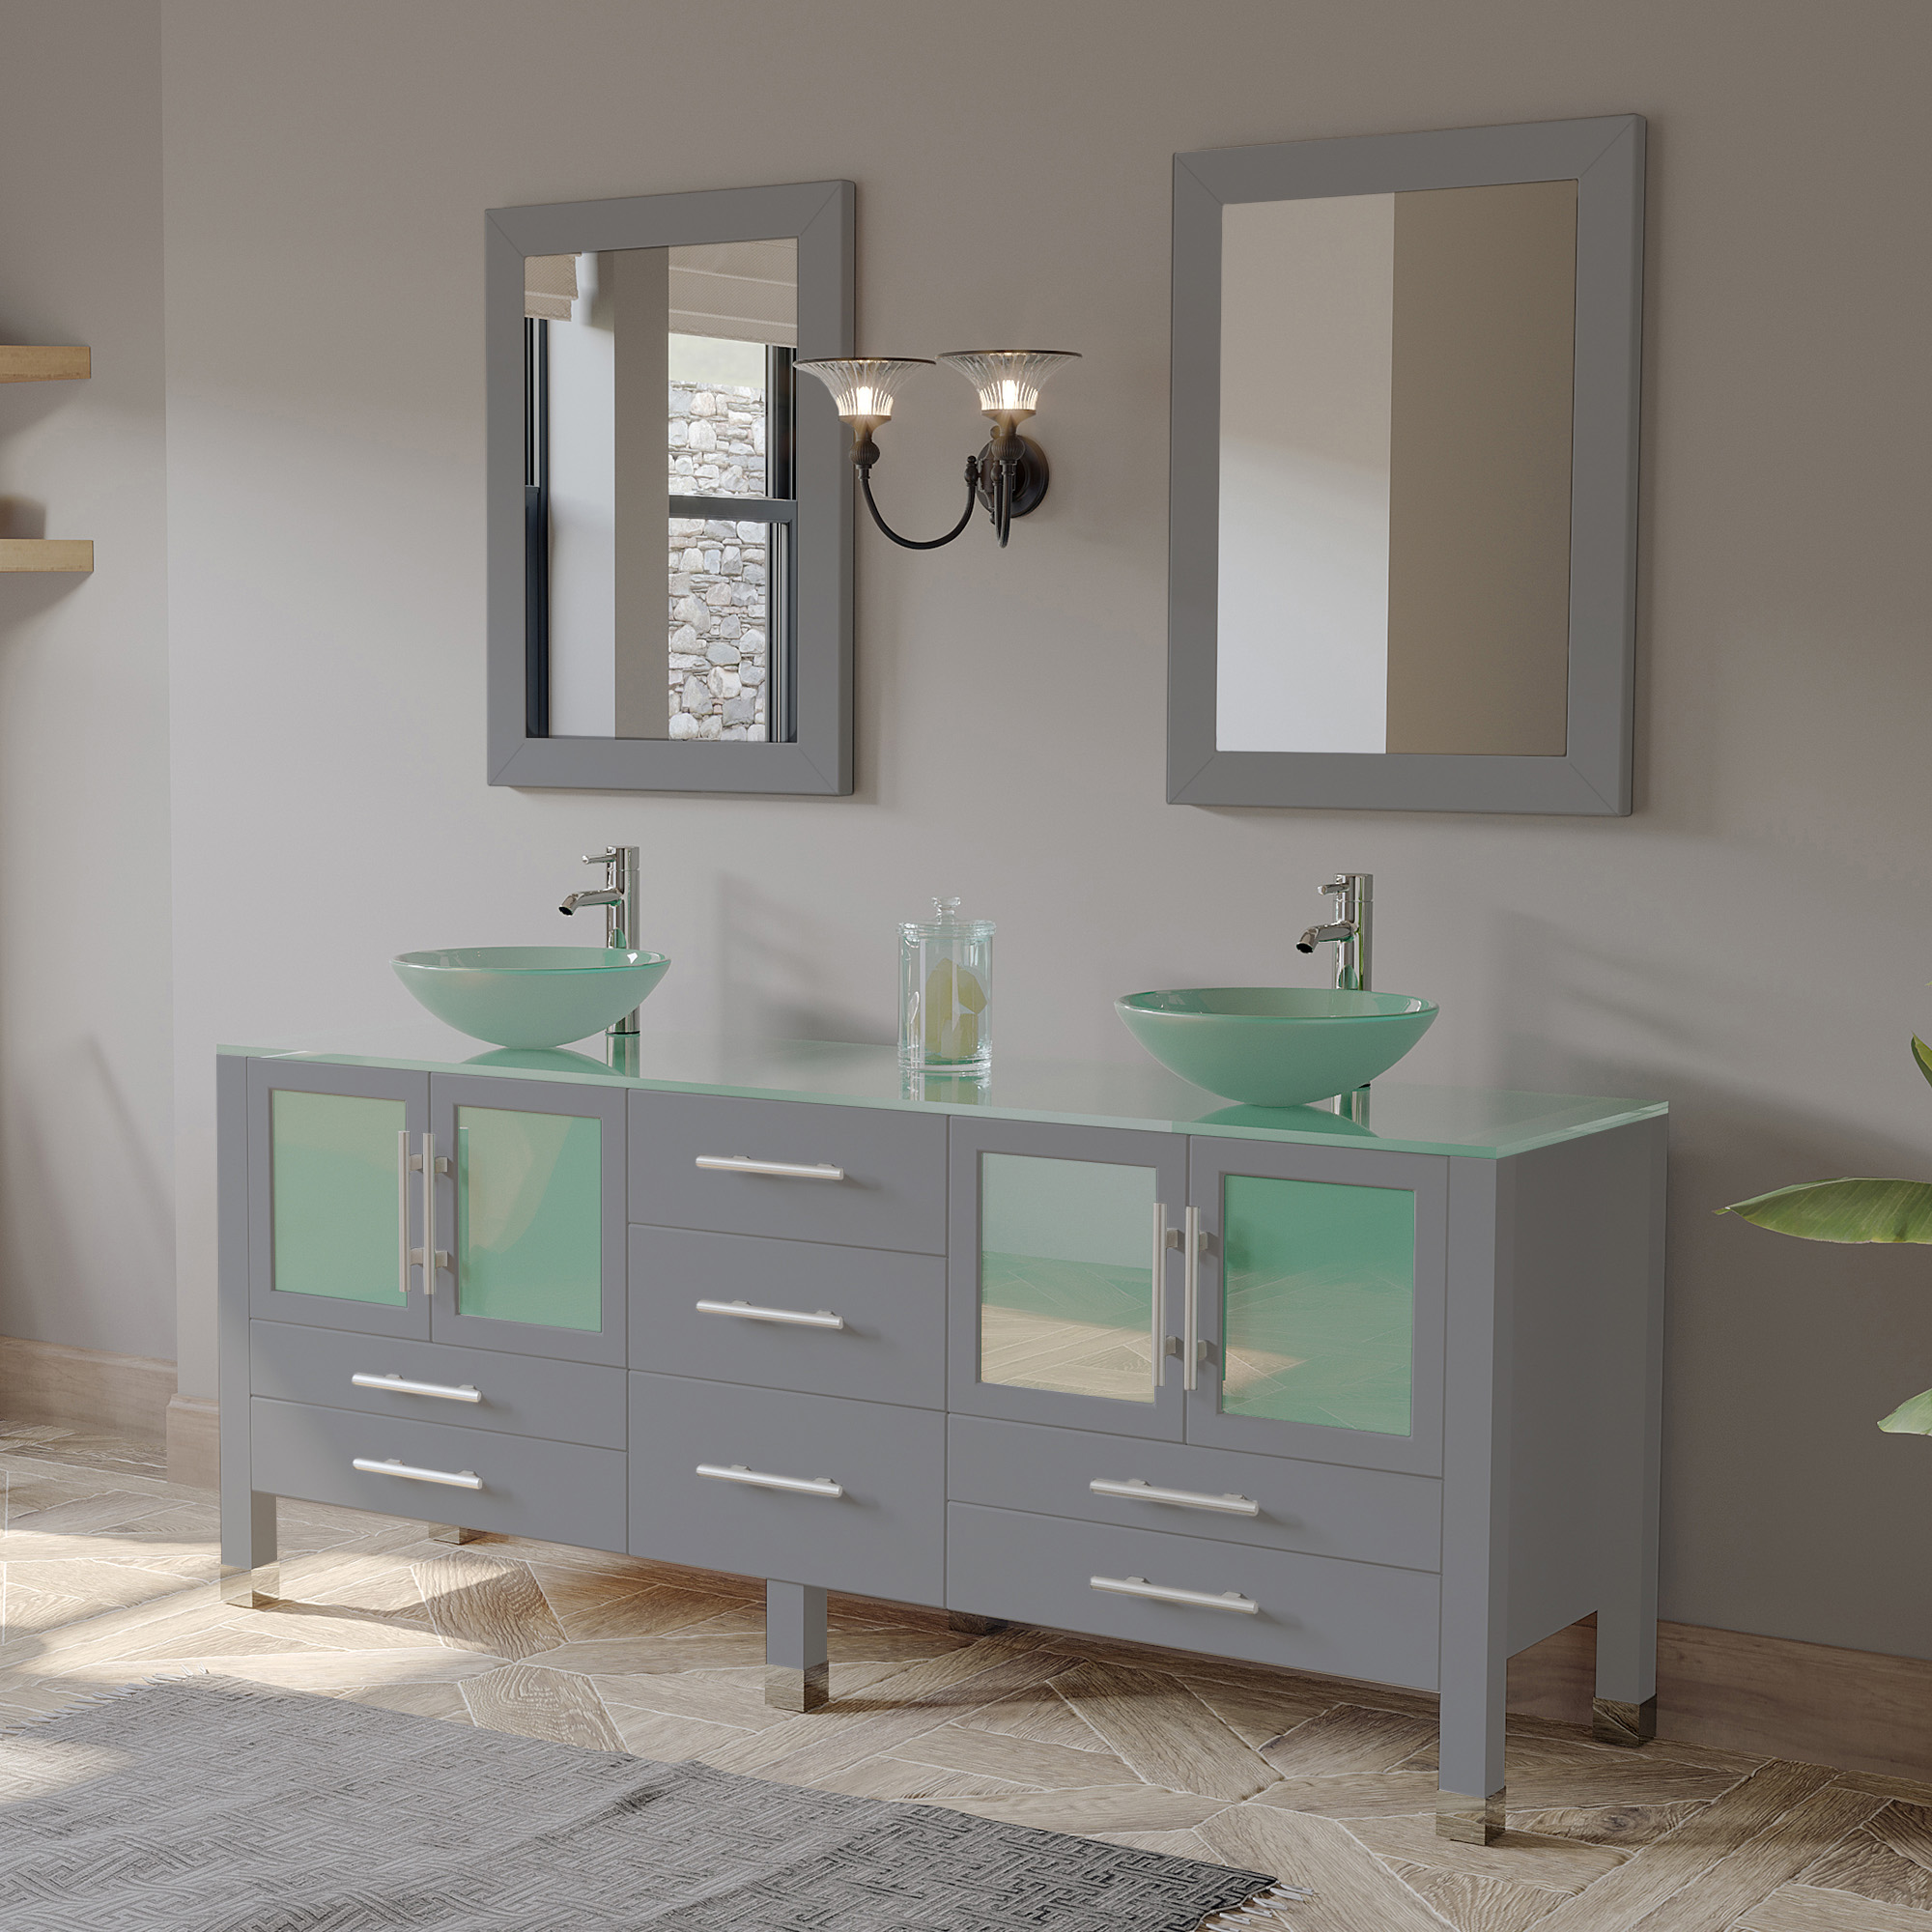 71" Double Sink Bathroom Vanity Set in Modern Gray Finish with Polished Chrome Plumbing